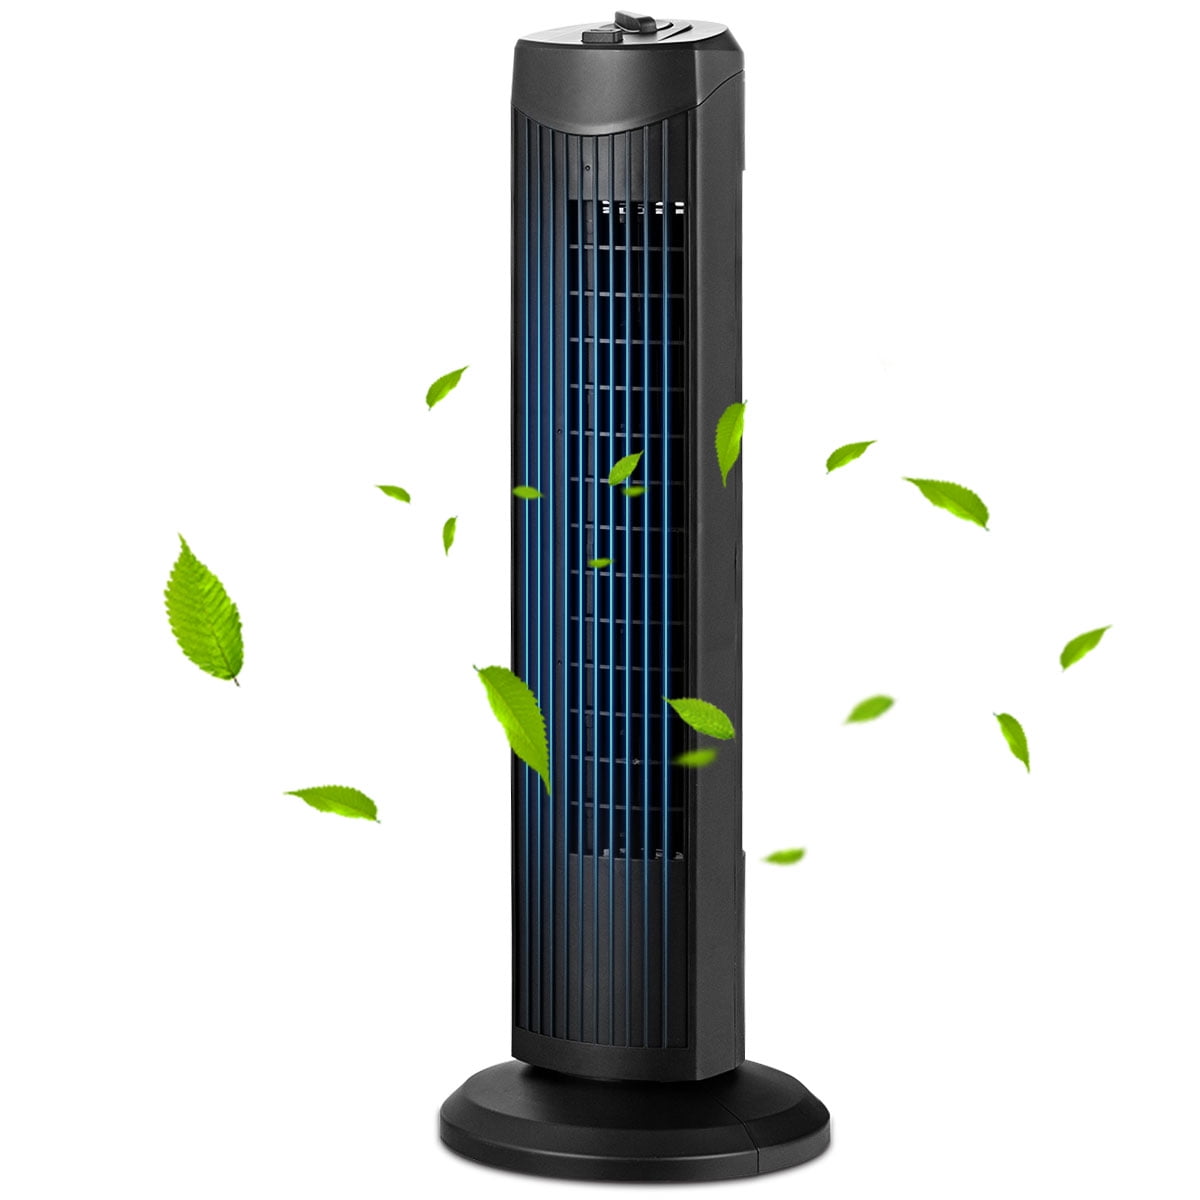 Quiet and Powerful Oscillating 29 Inch 3 Speed Tower Fan for Home or Office 